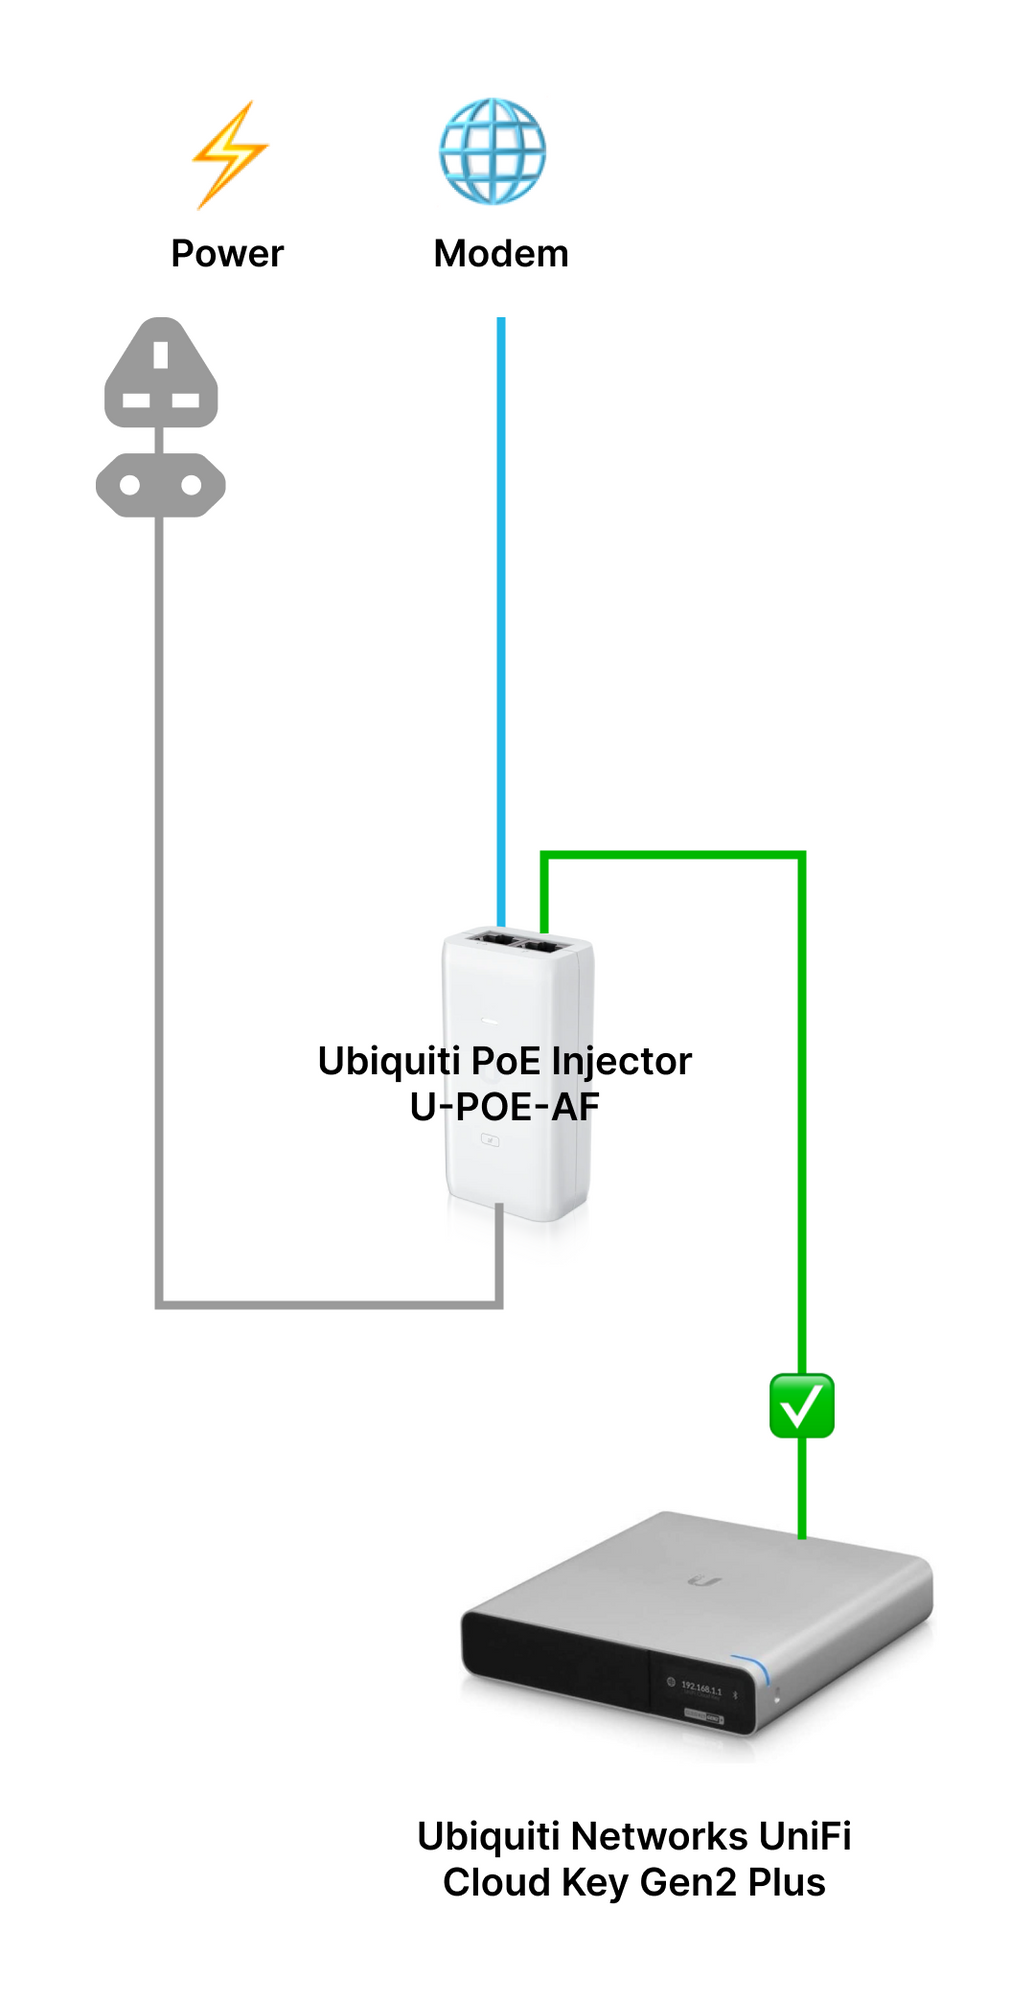 Set up help - unable to get power from PoE Switch